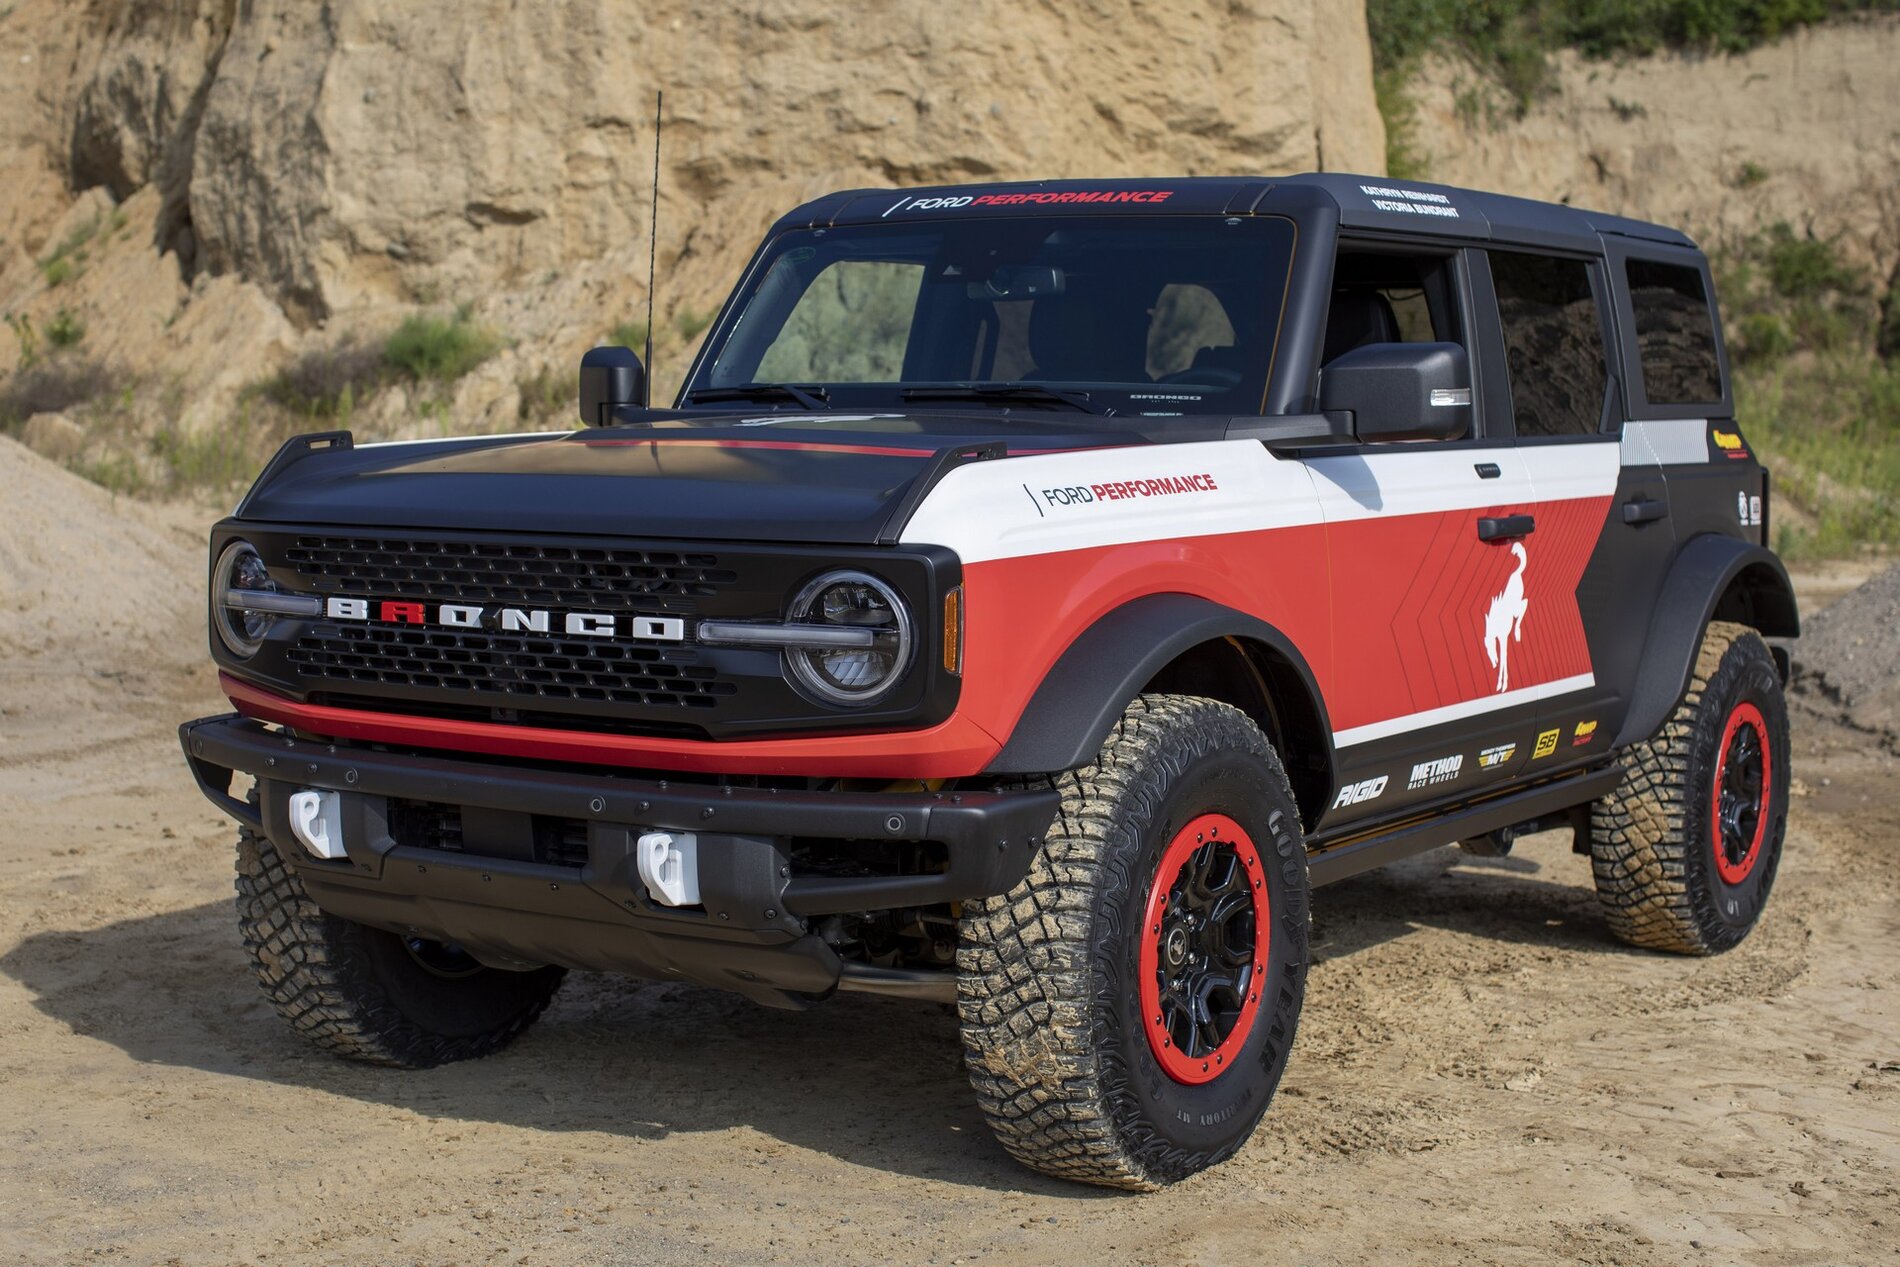 Ford Bronco 3 Bronco Teams Will Compete in 2022 Rebelle Rally ford-bronco-rebelle-rally-33-jpg-